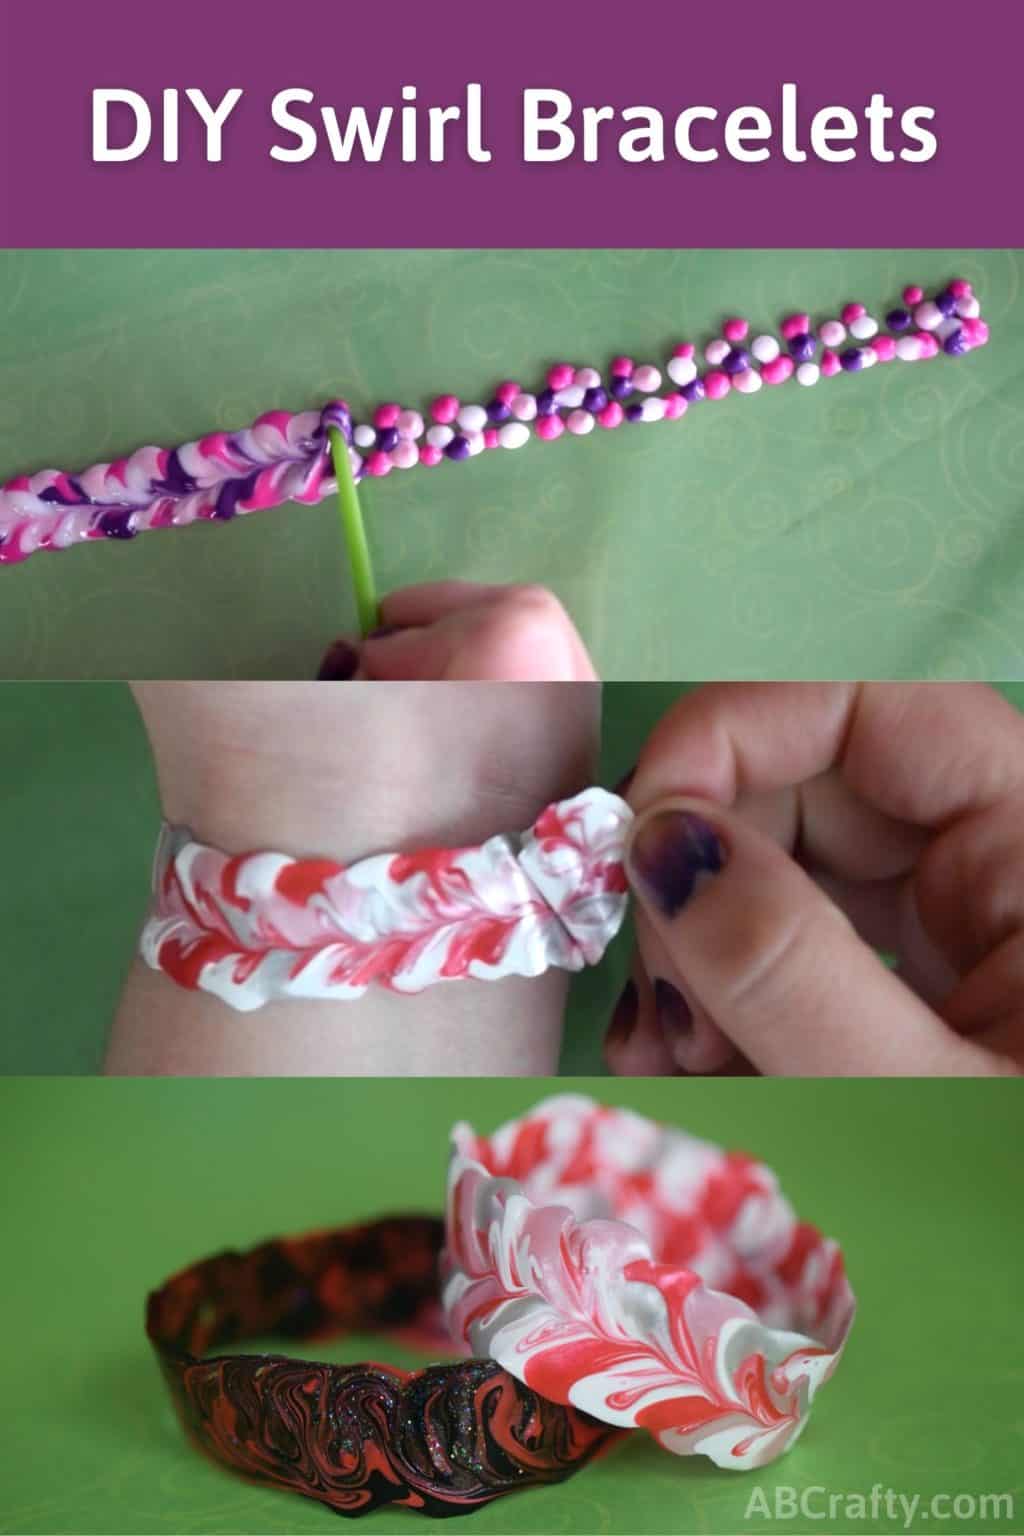 Process to how to make DIY bracelets with fabric paint, with the title "DIY Swirl Bracelets"